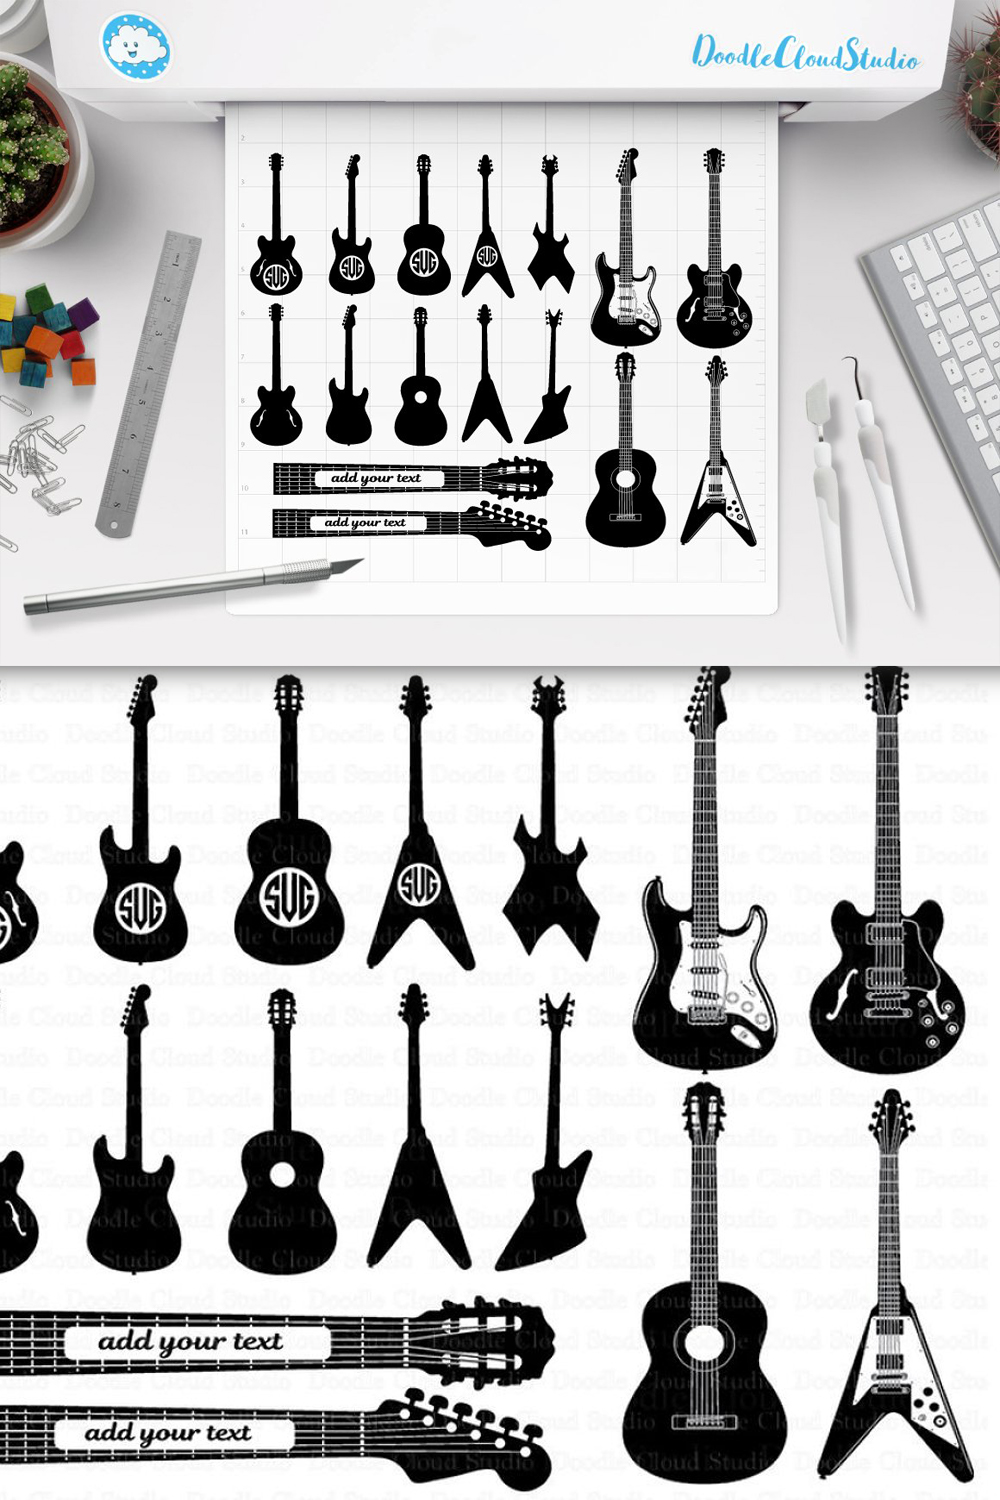 Prints on any surfaces with monotone guitars.